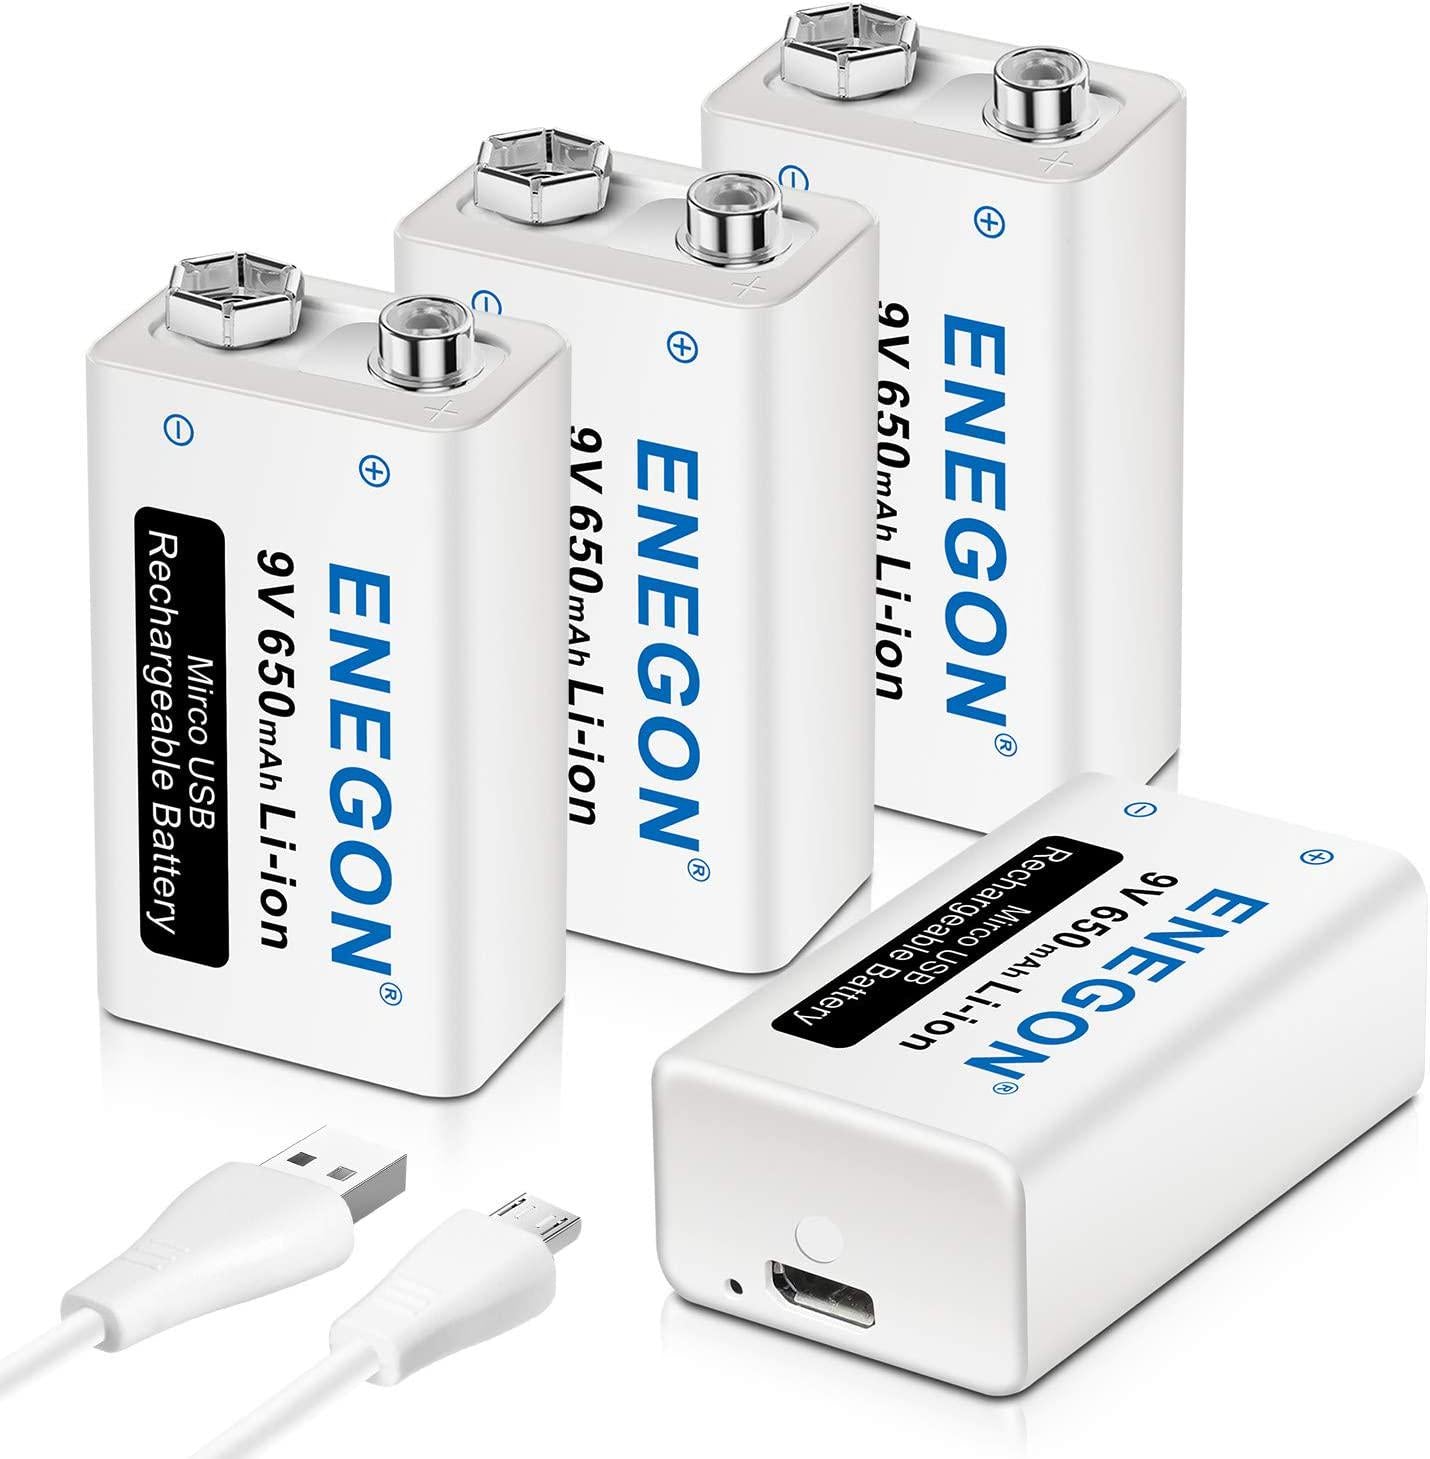 ENEGON, ENEGON 9V Direct USB Rechargeable Lithium-ion 650mAh Batteries with 2 in 1 Micro USB Cable for Micro Phone, Smoke Alarms, Electronic Toys, Walkie-Talkie and More Devices (4-Pack)